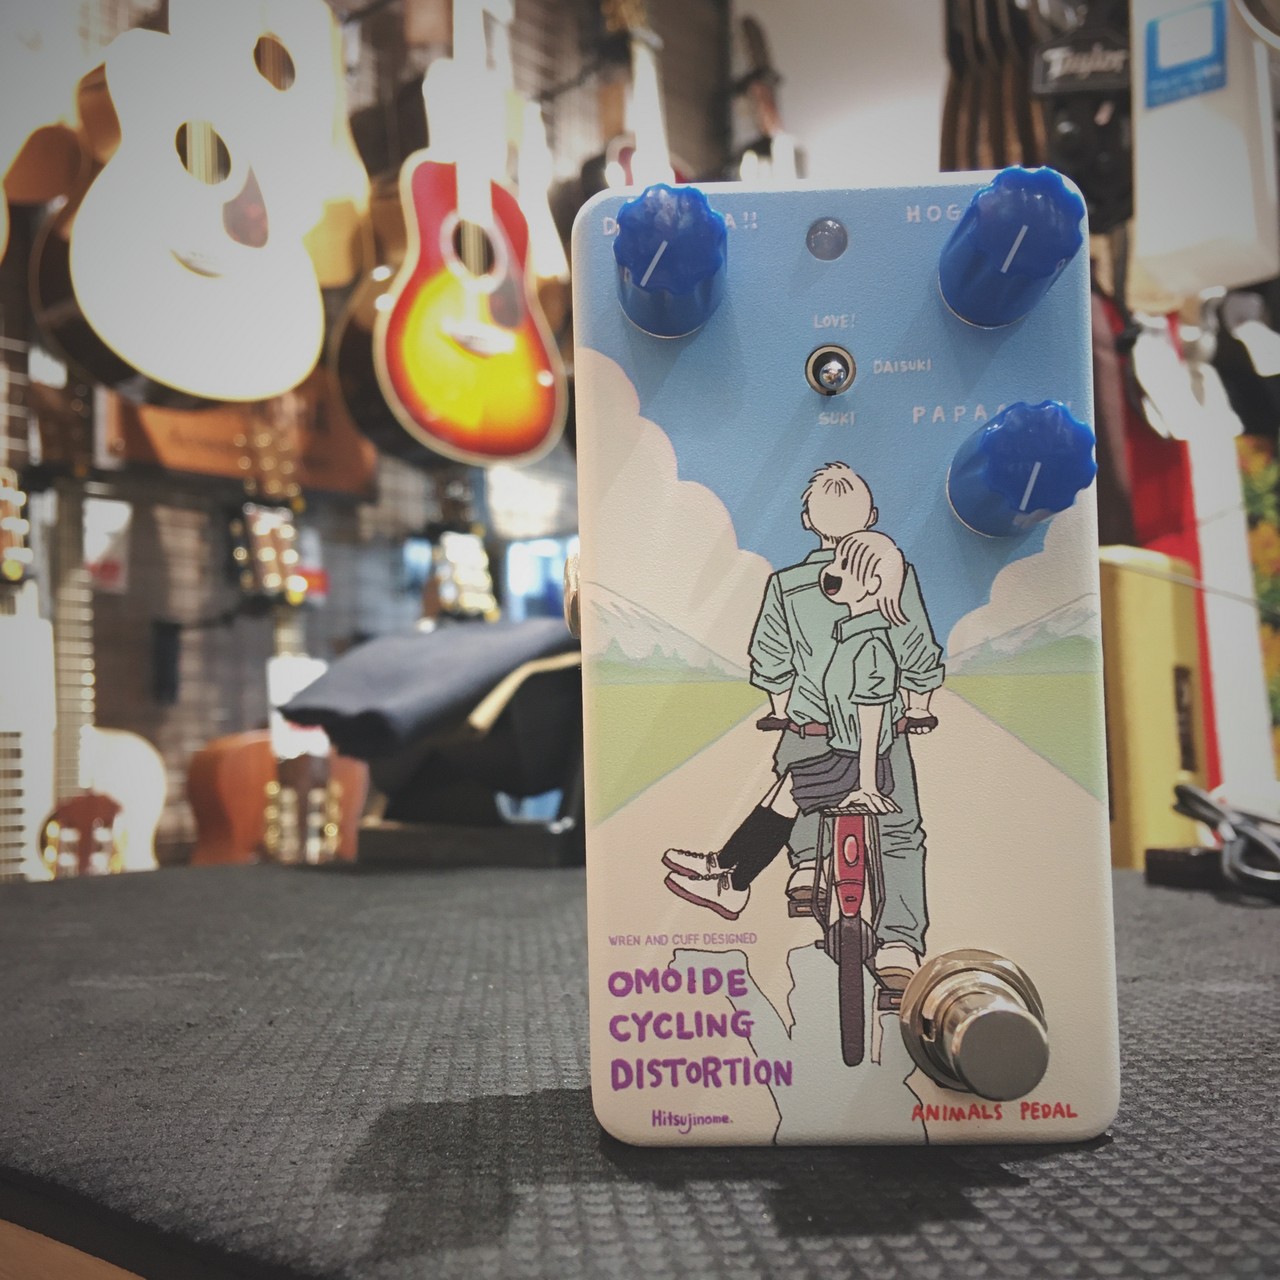 Animals Pedal Custom Illustrated 042 OMOIDE CYCLING DISTORTION by 